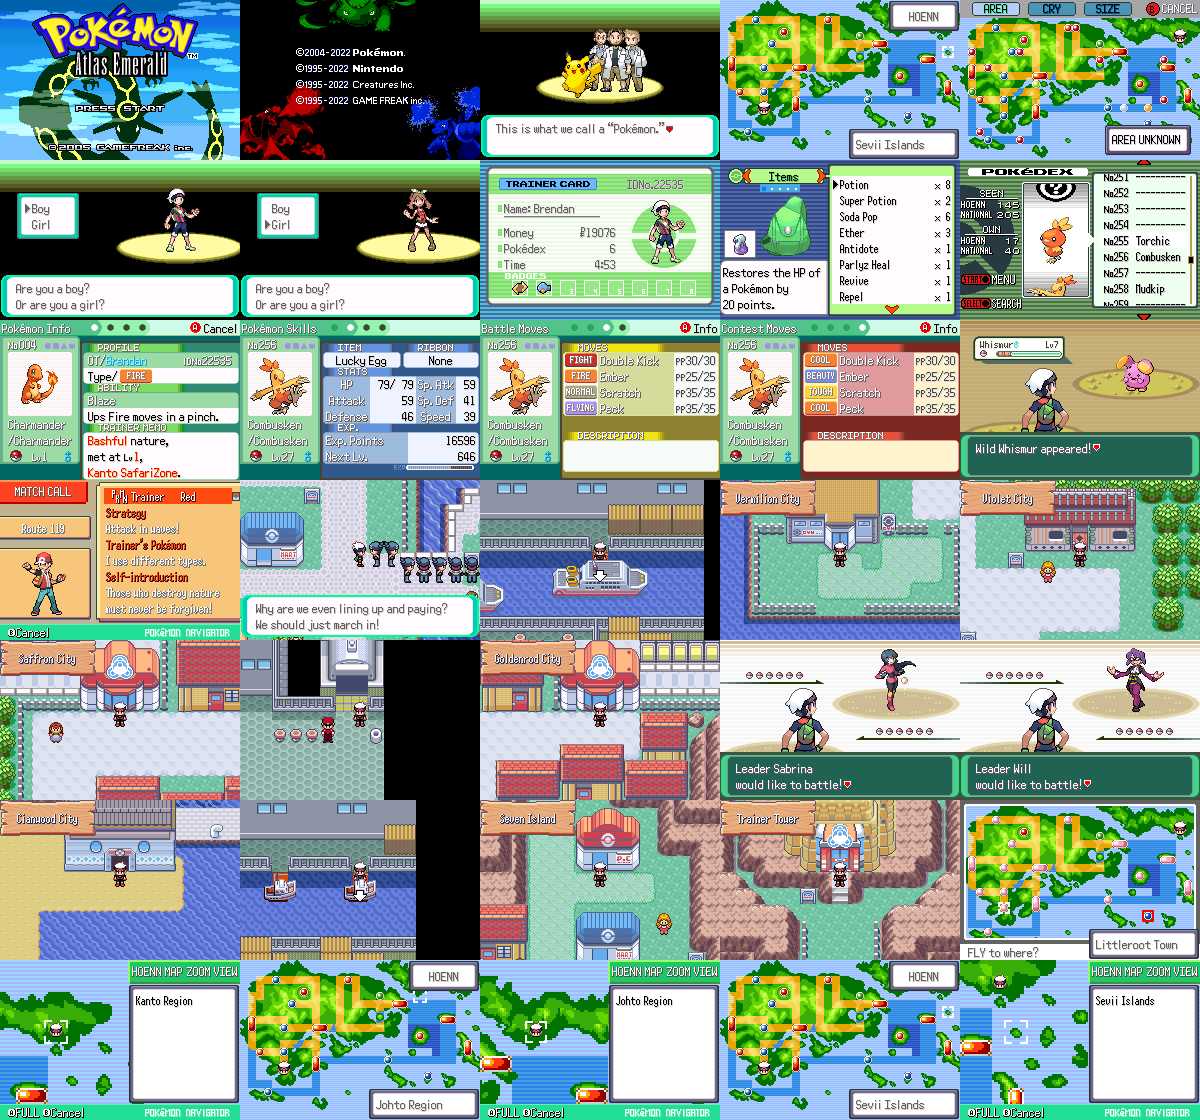 Pokemon Atlas Emerald (Beta 1.0rx) - Important Update May24 - Game now is Completable